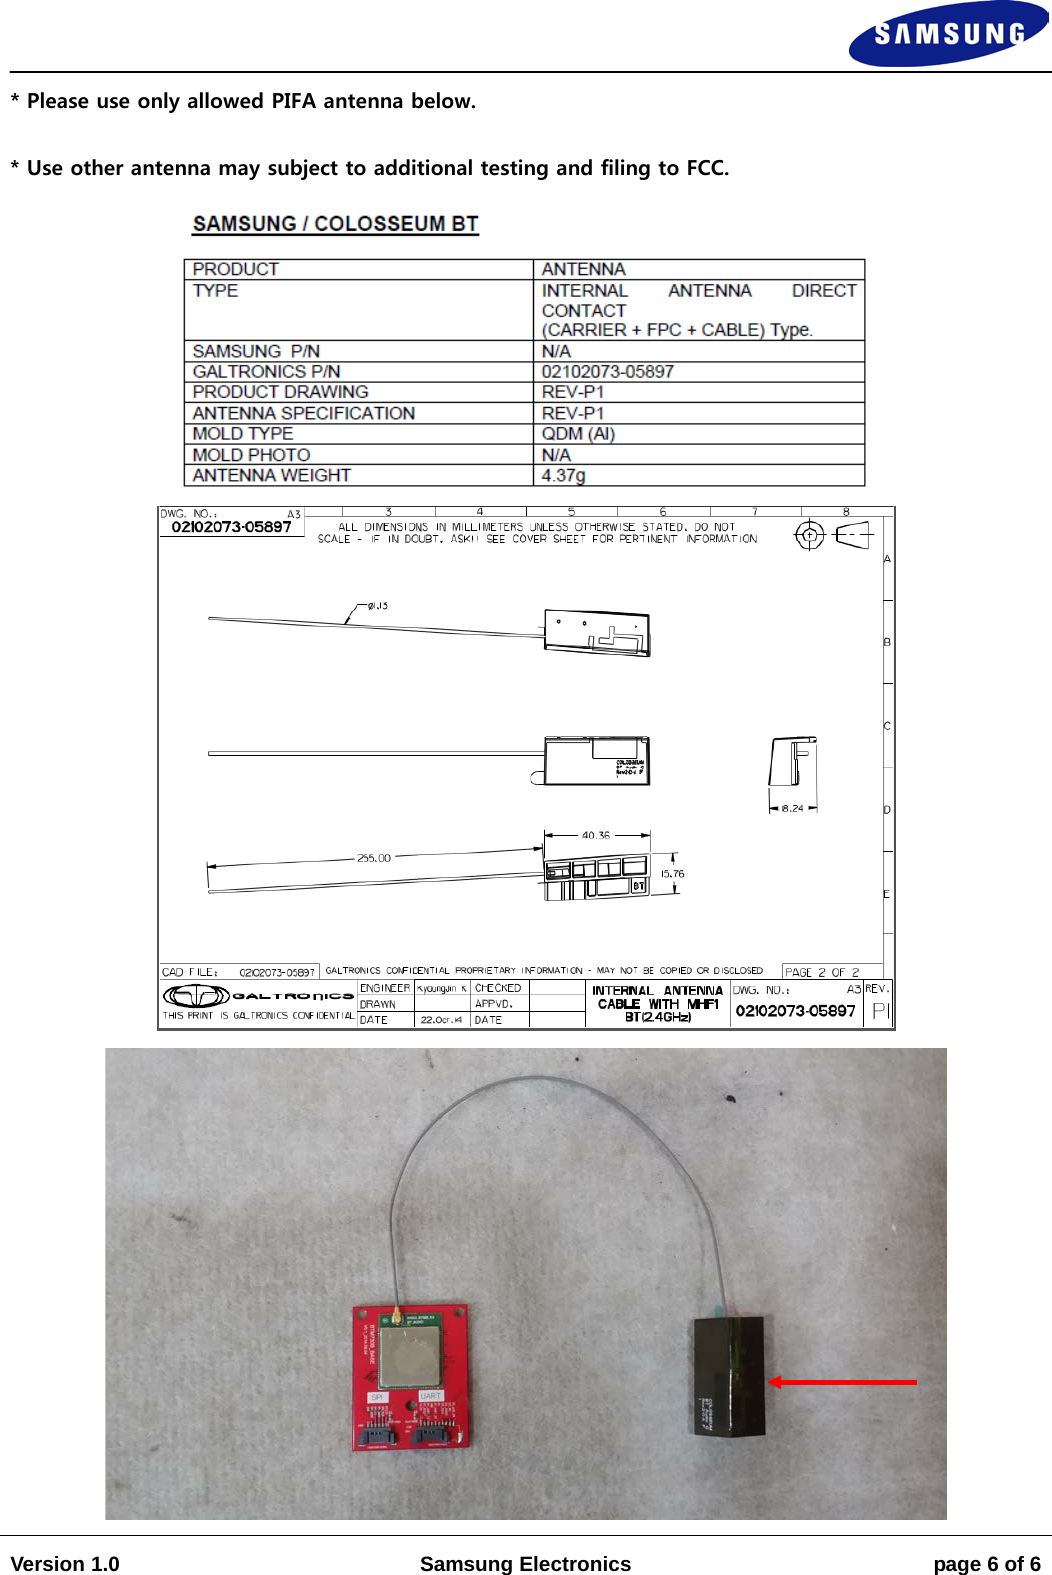                                                                                                                                                                    Version 1.0 Samsung Electronics page 6 of 6   * Please use only allowed PIFA antenna below. * Use other antenna may subject to additional testing and filing to FCC.    